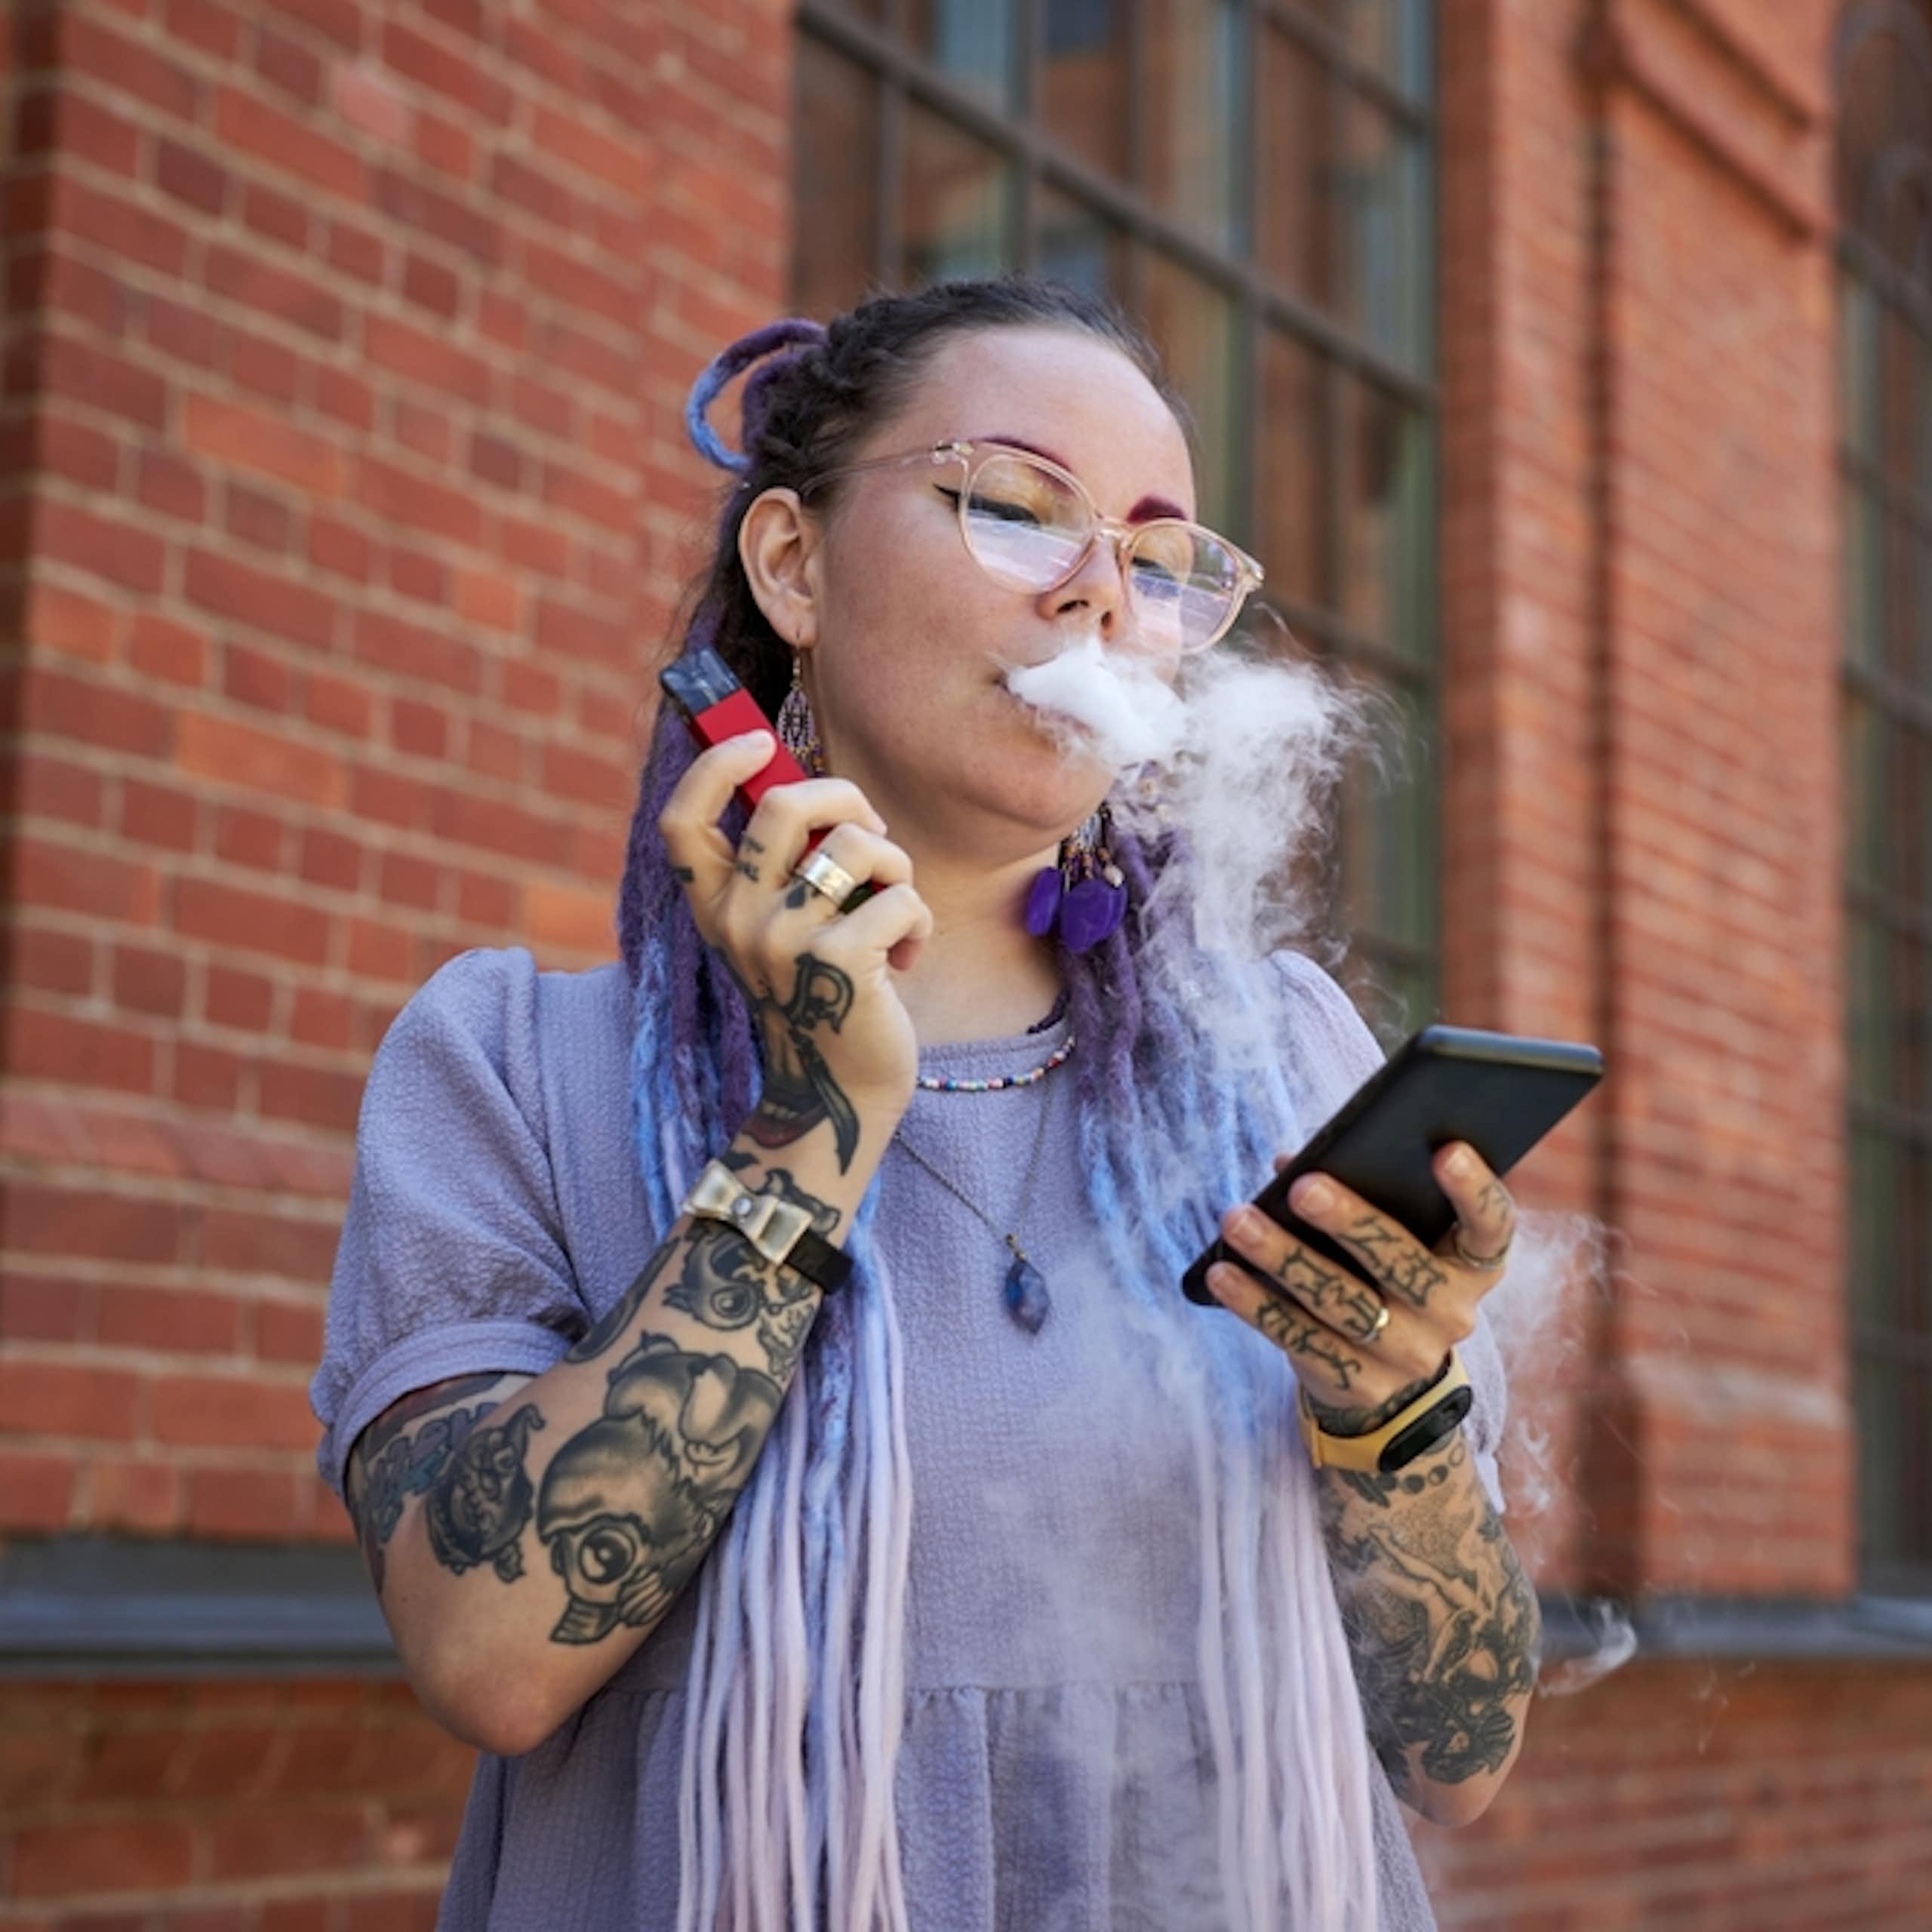 Young woman vaping, holding smartphone, outside redbrick building